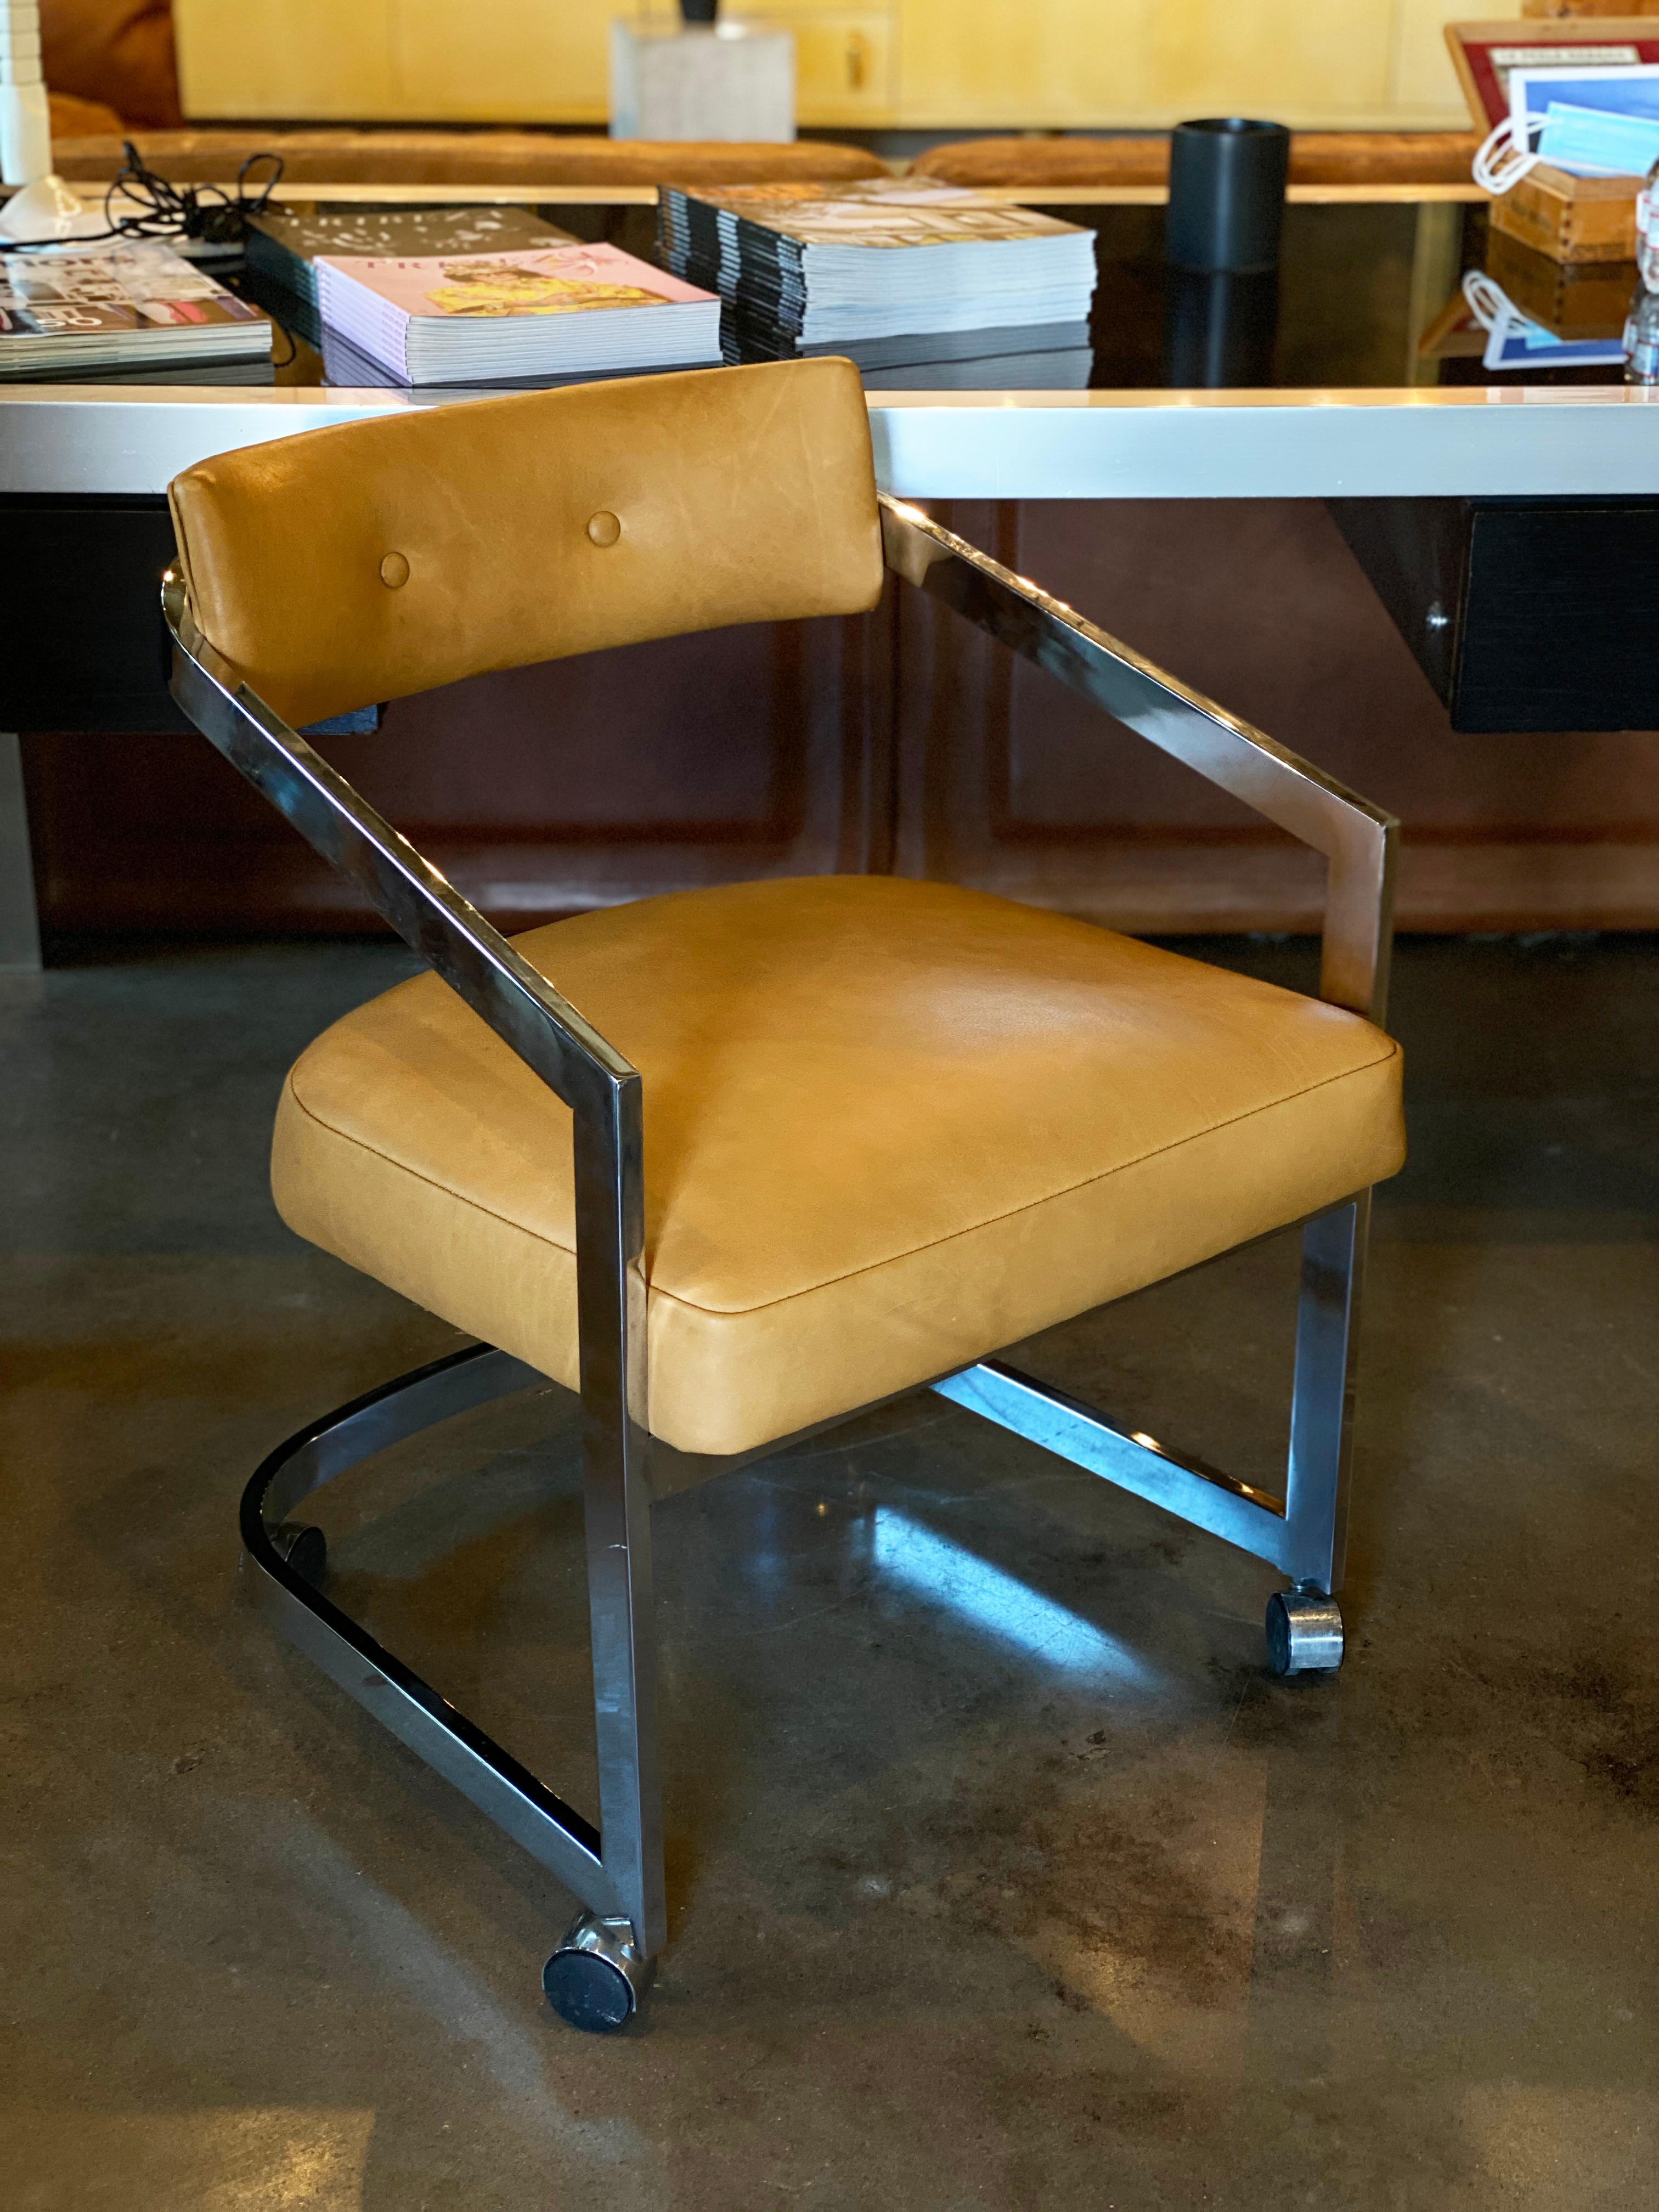 Chrome cantilevered dining chairs on casters by  Design Institute of America, labeled, 1982. New custom upholstery in rich aniline-dyed leather (light brown to a camel in color). Seat height 18.5 inches.

Four additional chairs are available in the